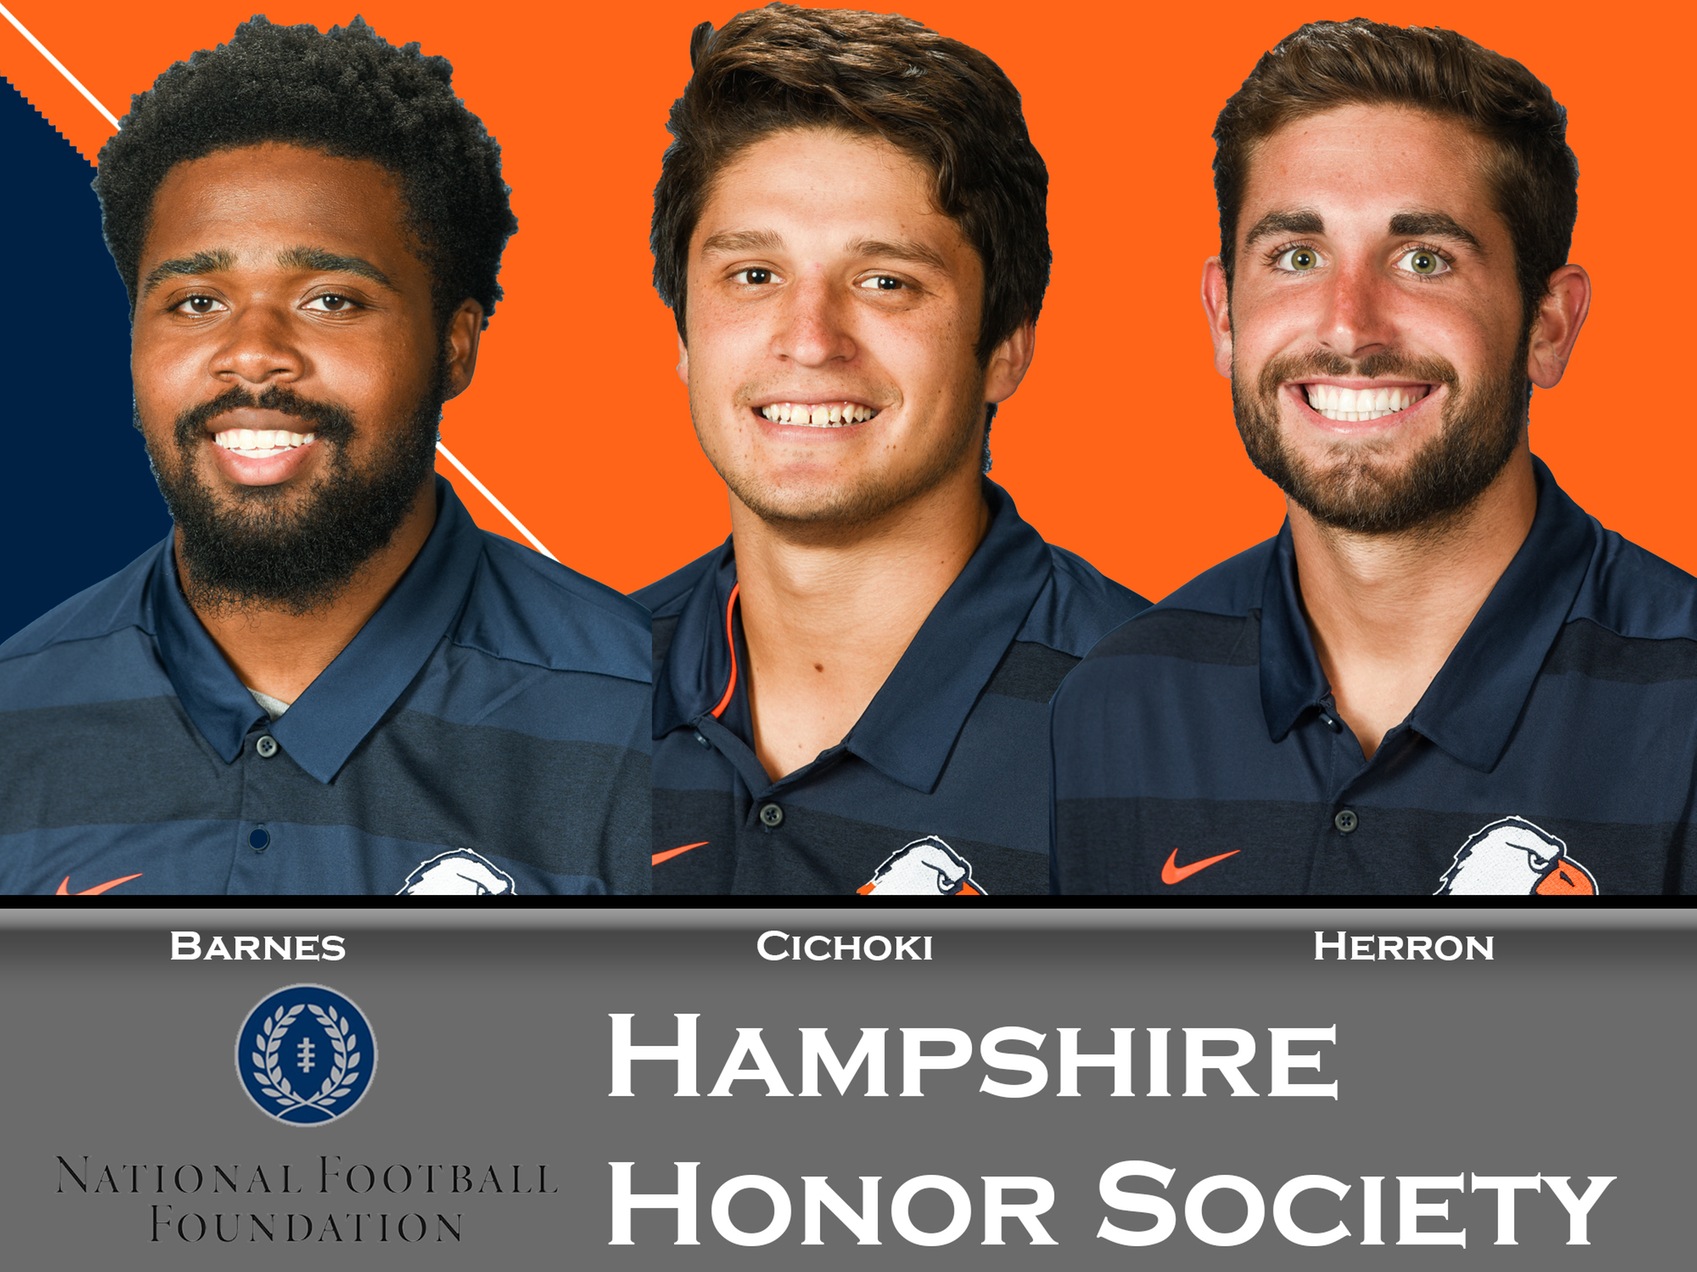 Three Eagles tabbed for induction into NFF Hampshire Honor Society 